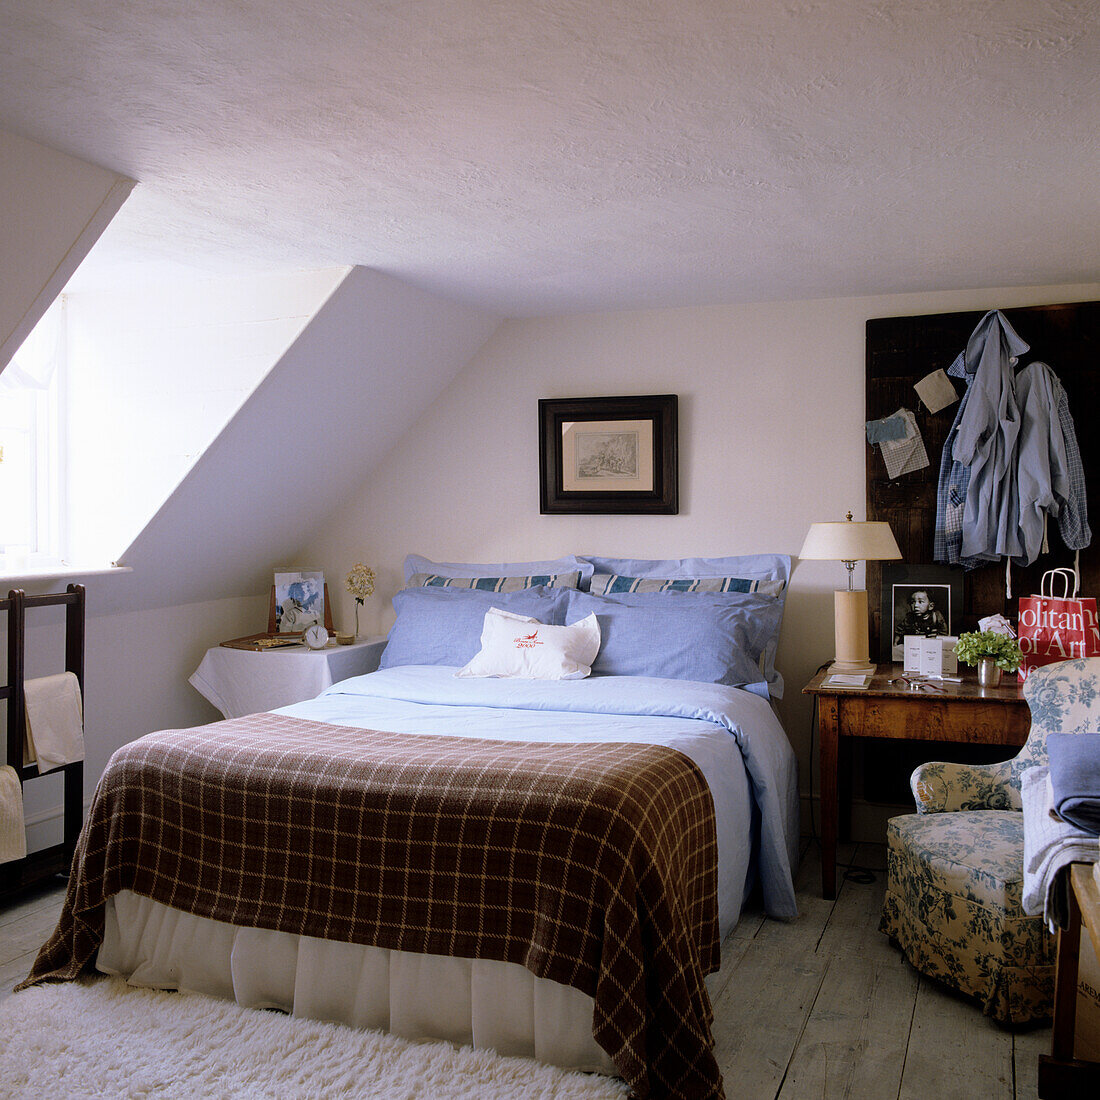 Sloped ceiling bedroom with checkered duvet cover and shades of blue blankets